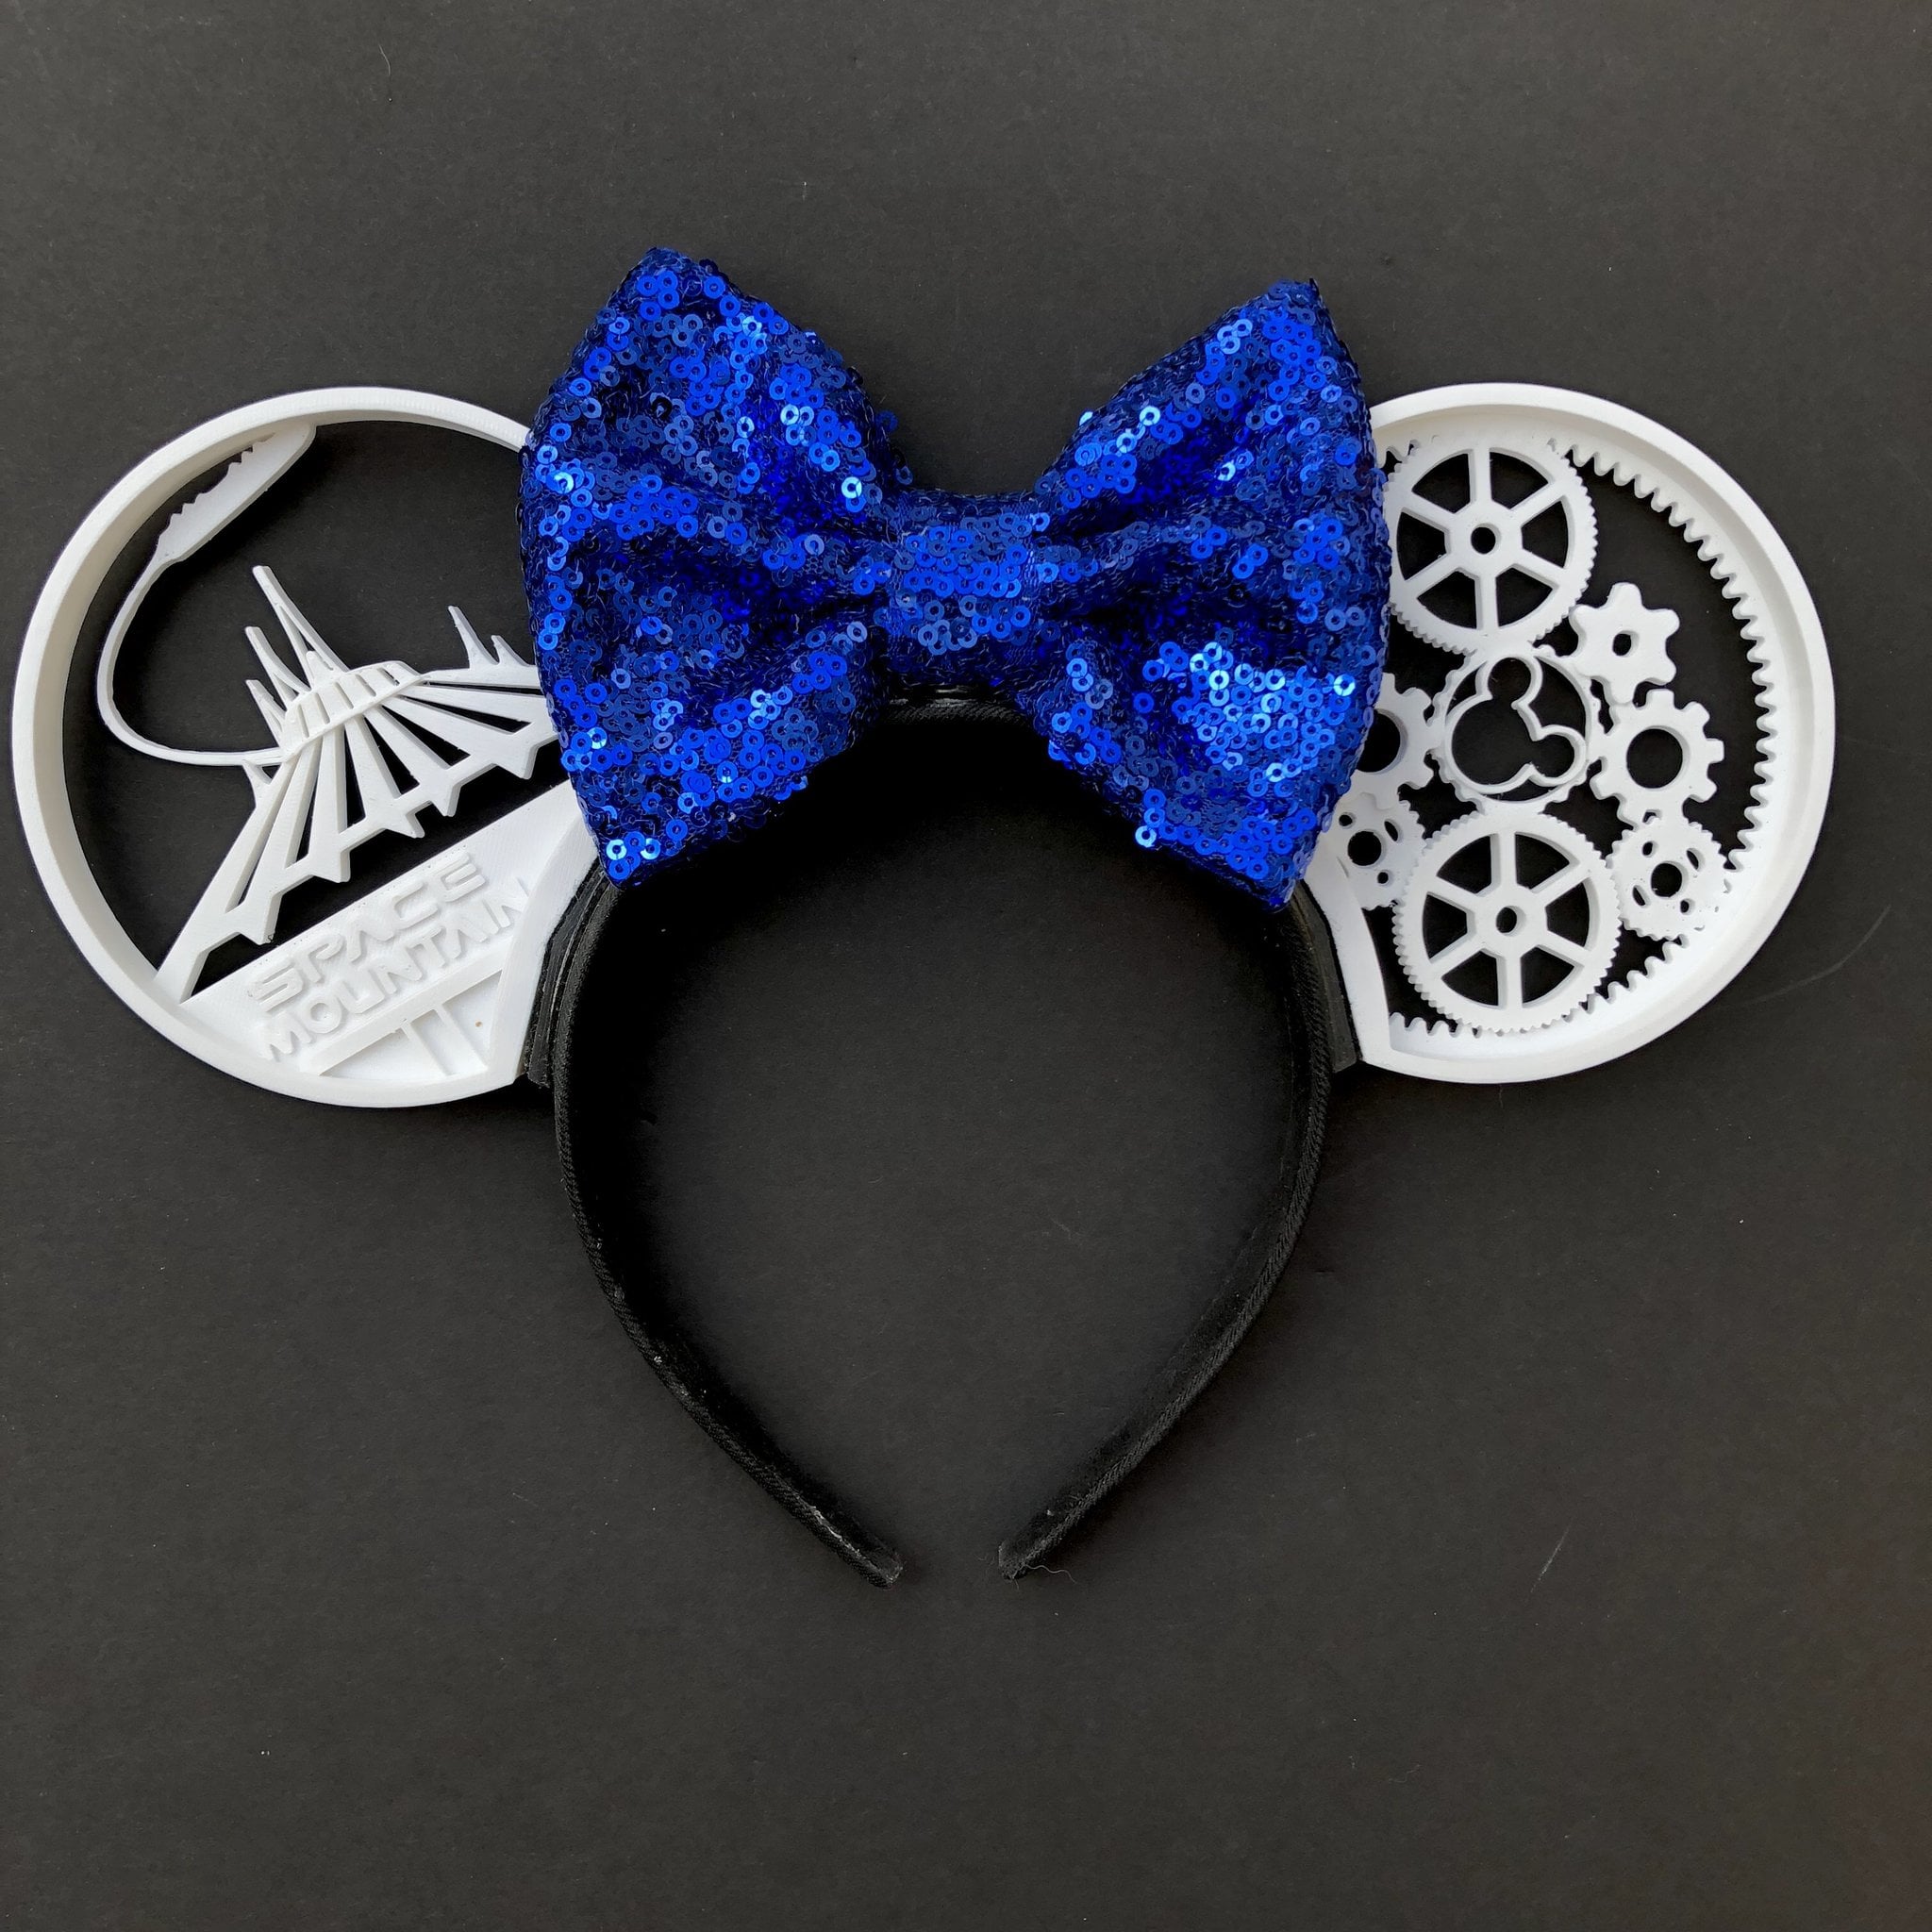 3D Printed Mouse ears Disney Character Inspired